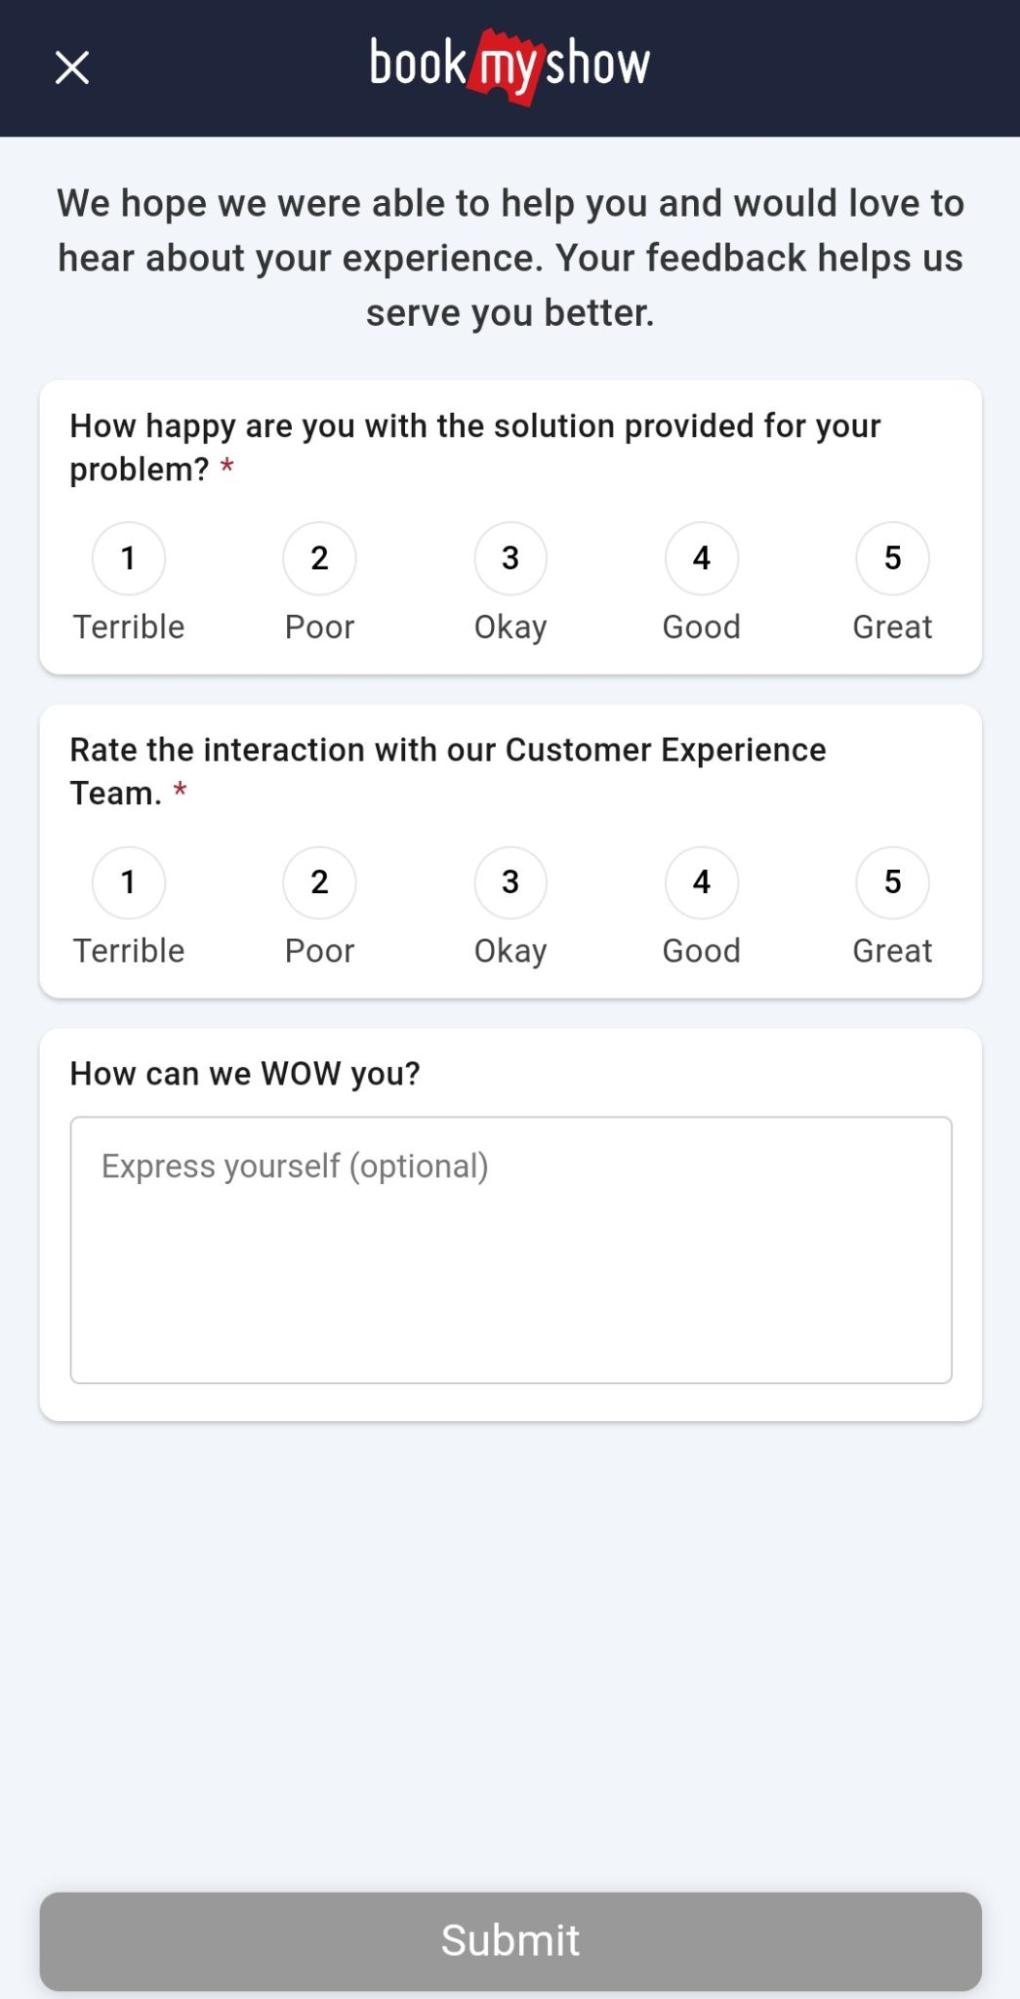 This is the image of a customer support survey popup shown on BookMyShow app asking users to rate their satisfaction with customer support. 